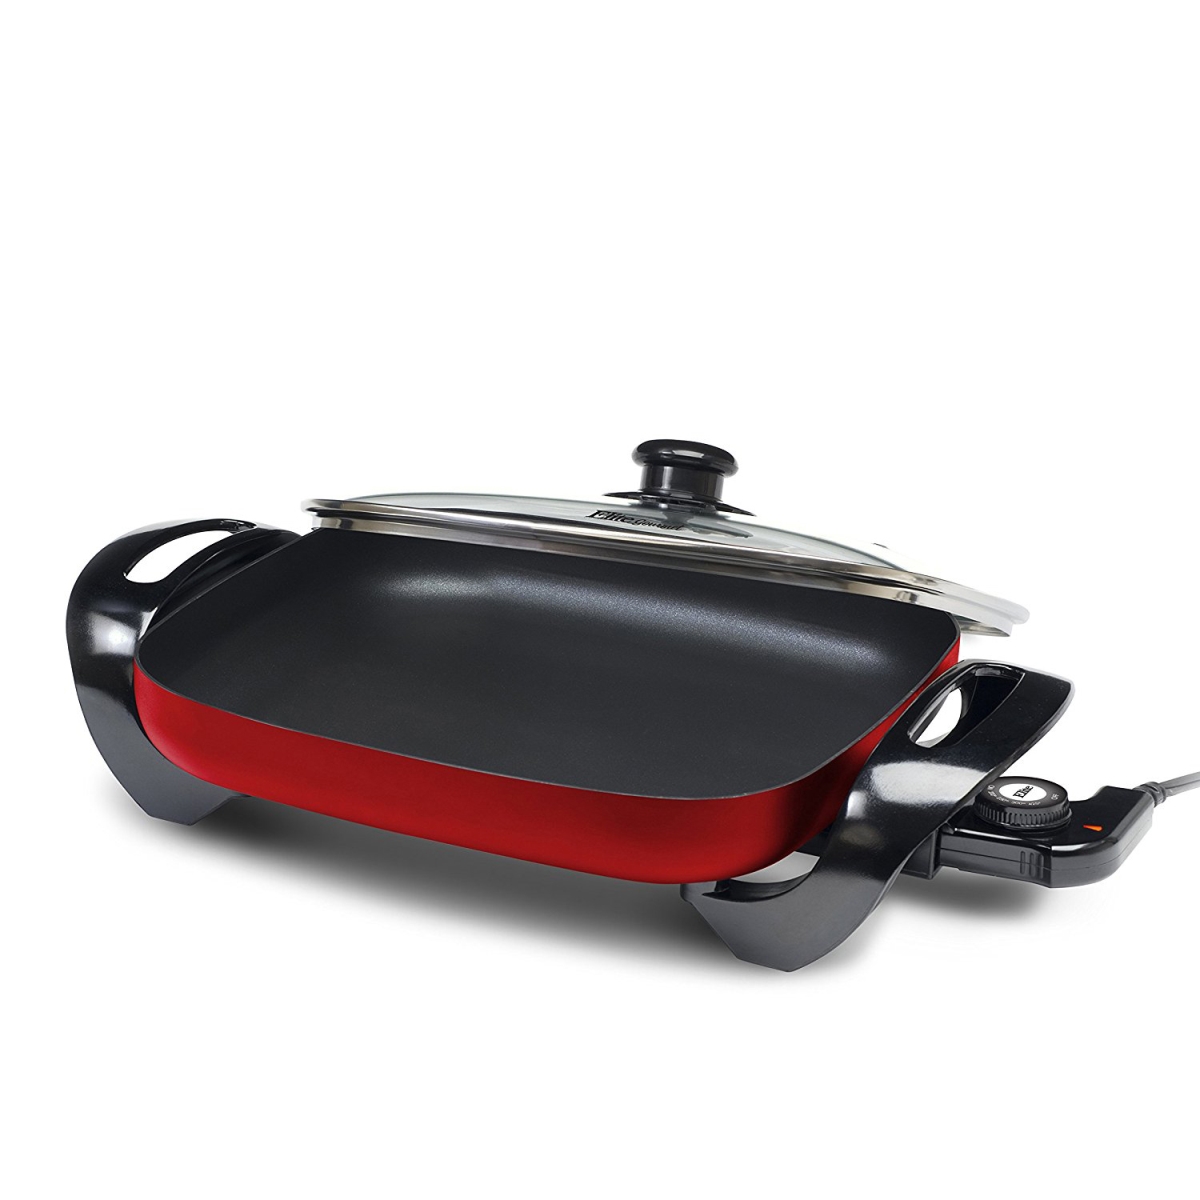 Eg1500r 15 & 12 In. Maximatic Electric Skillet With Glass Lid, Red